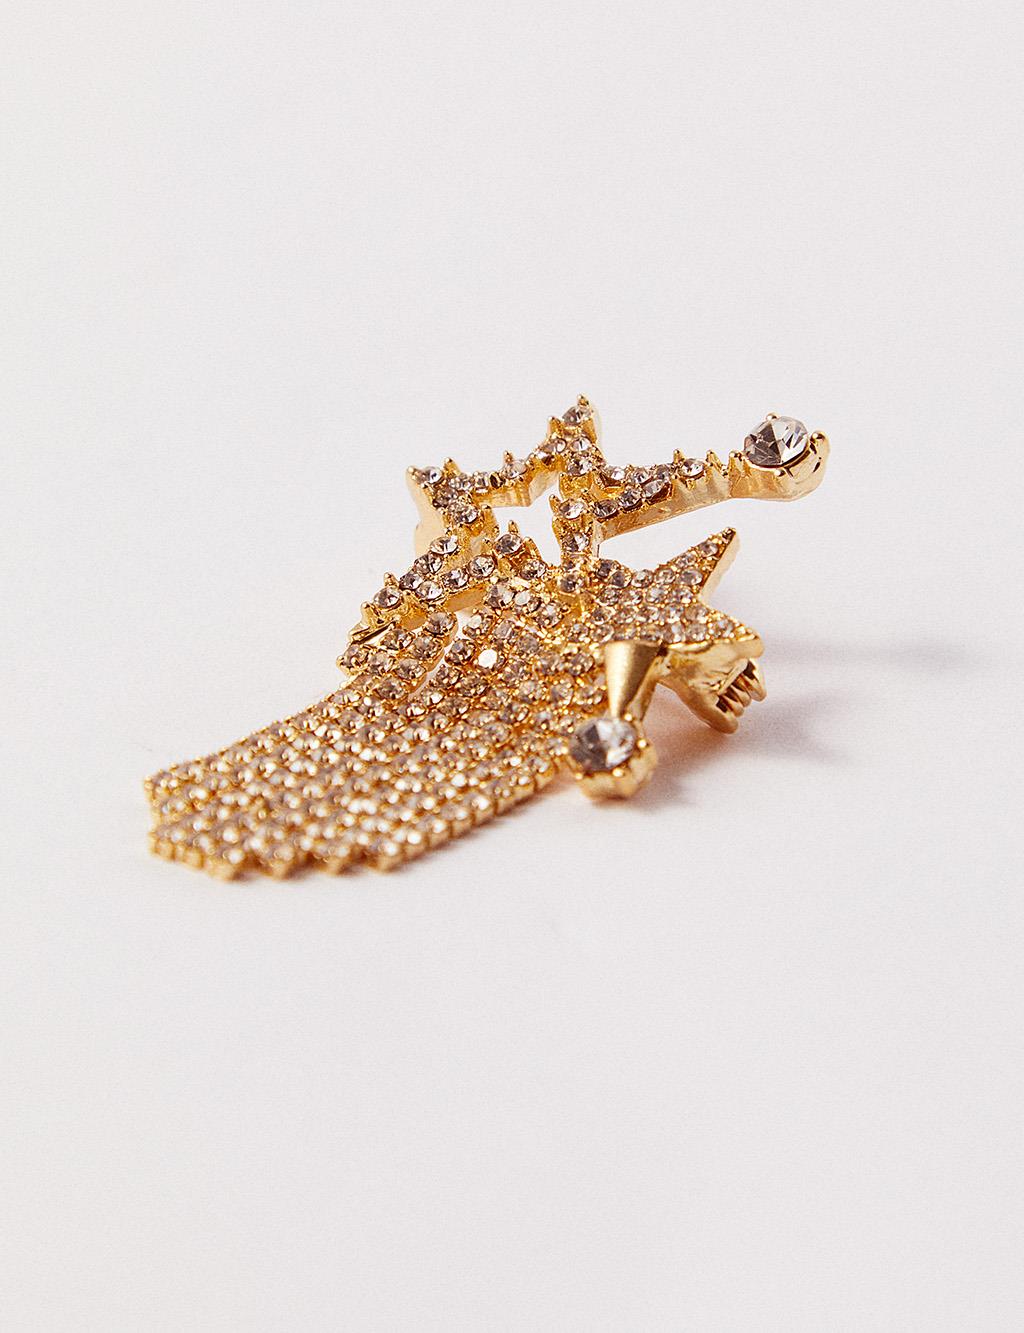 Star Figured Stone Embroidered Brooch Gold Color